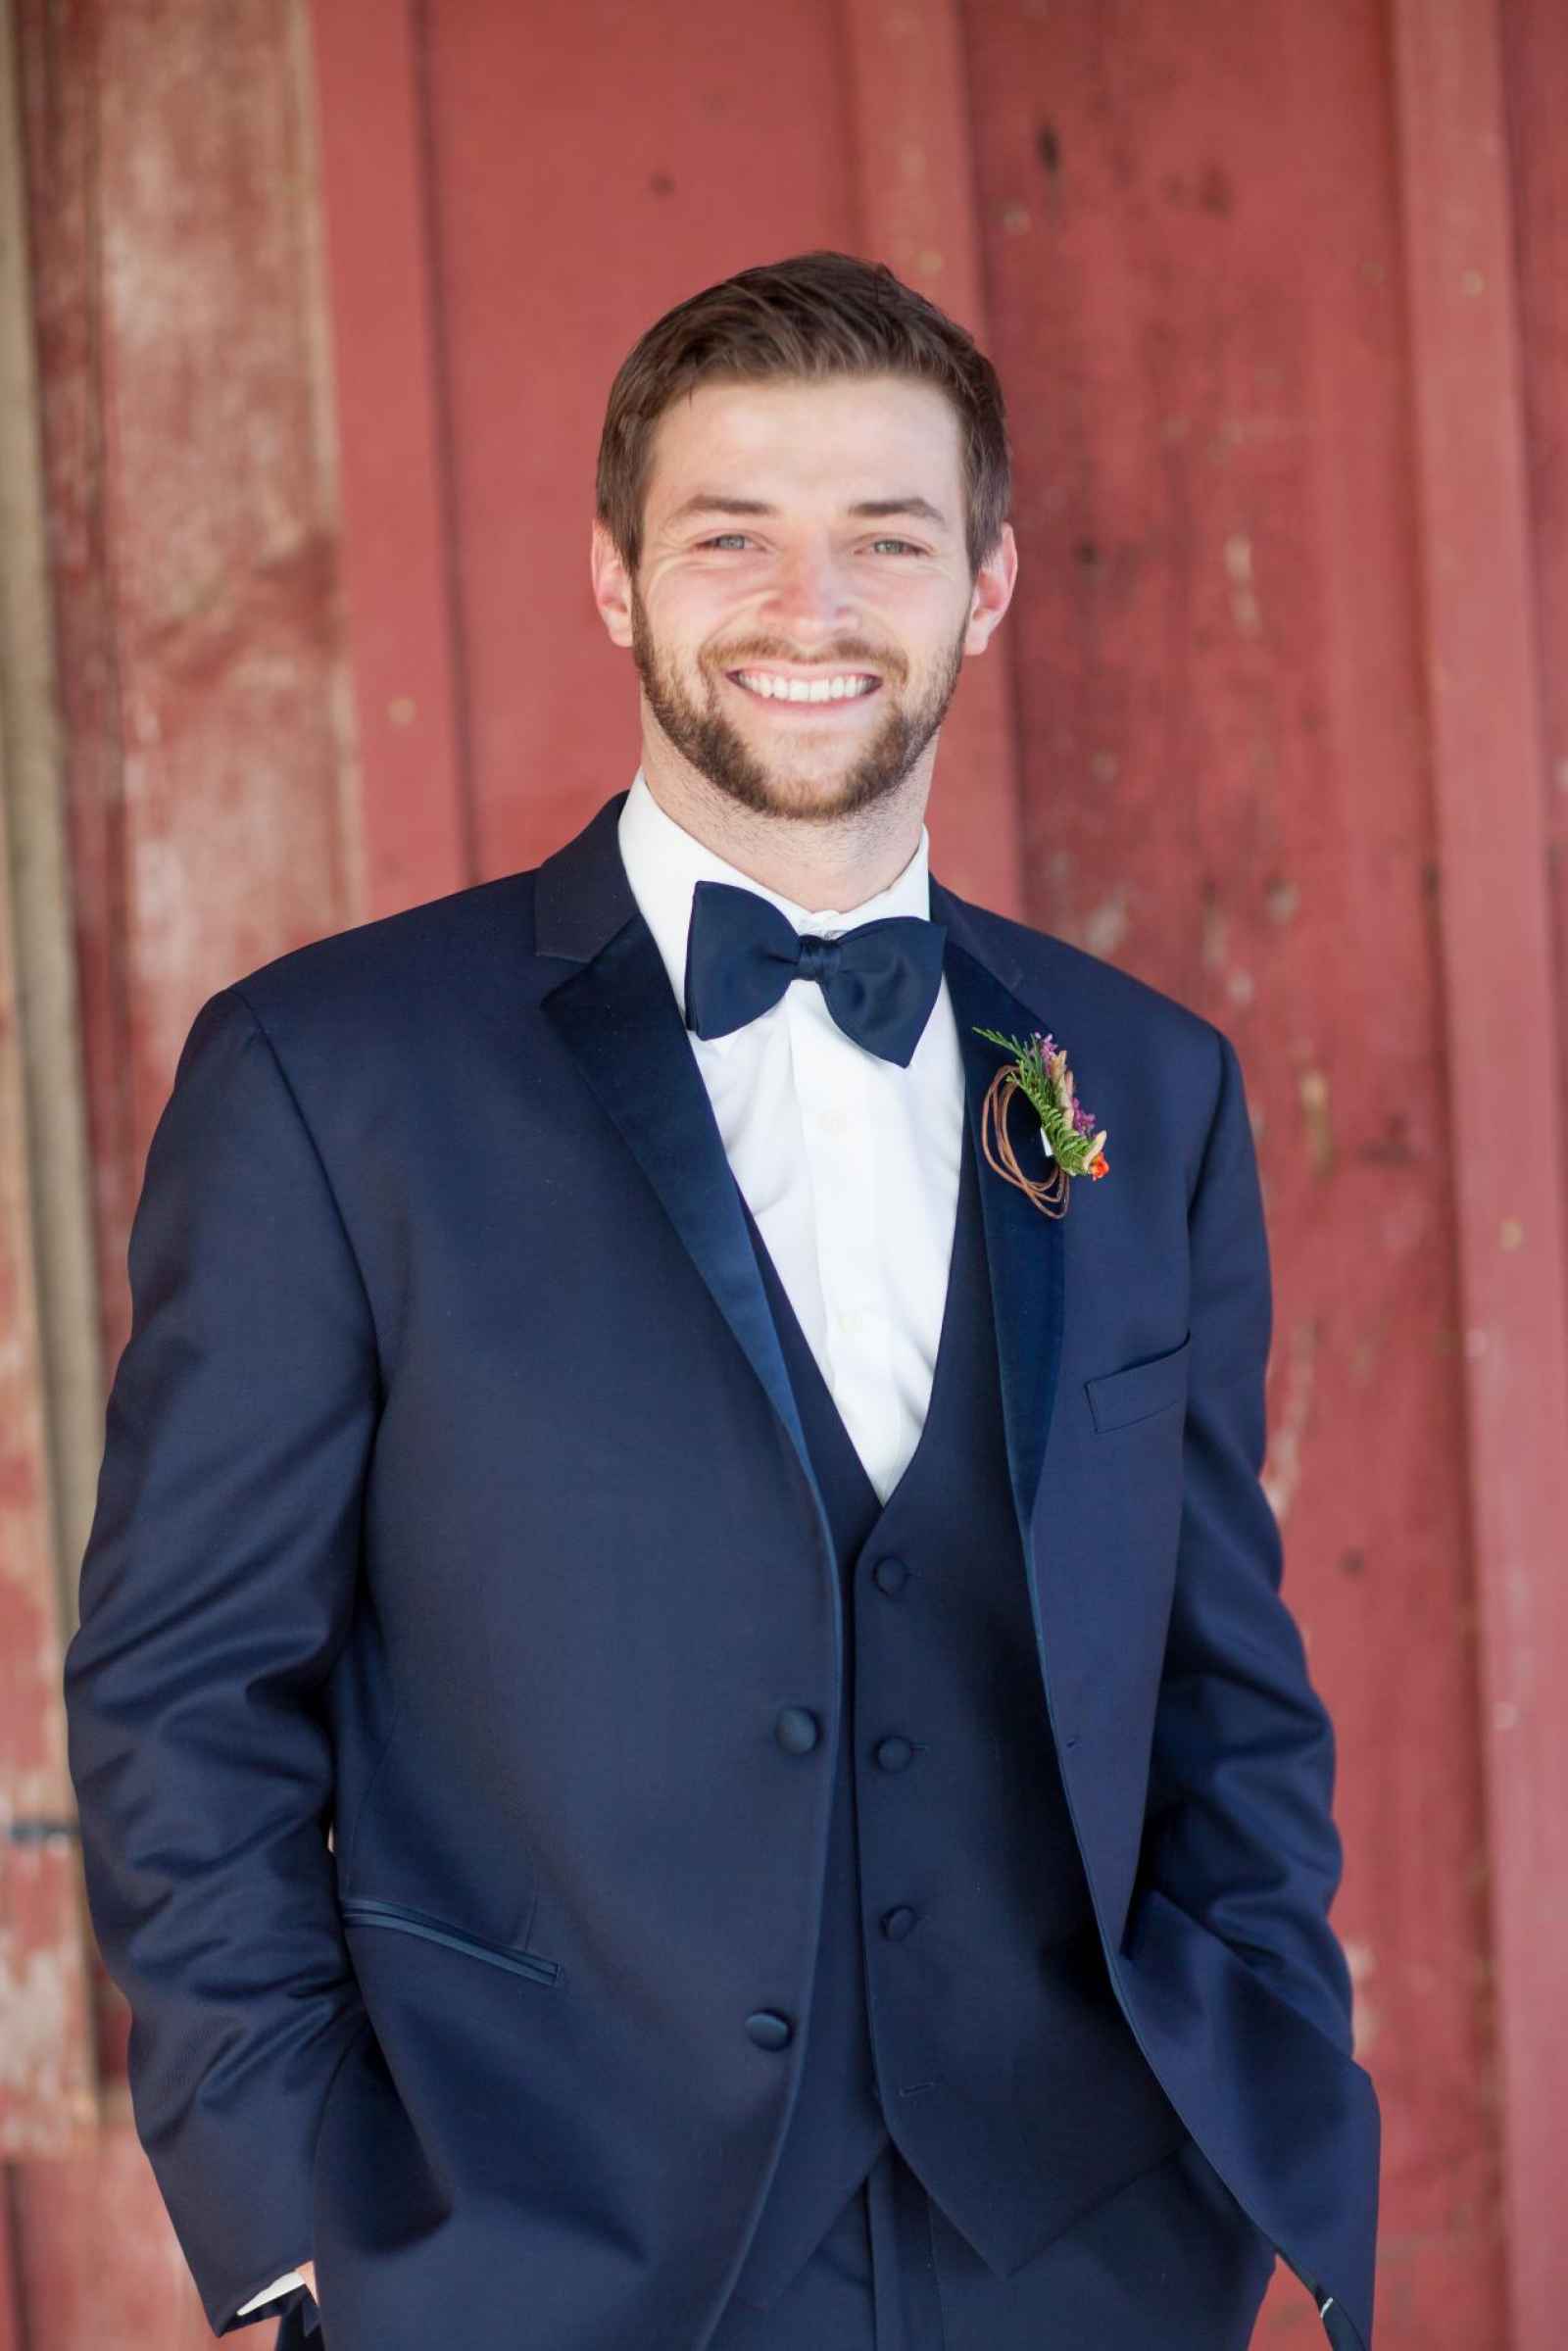 The Timeless Tux: A Perfect Look for Any Groom | WeddingDay Magazine